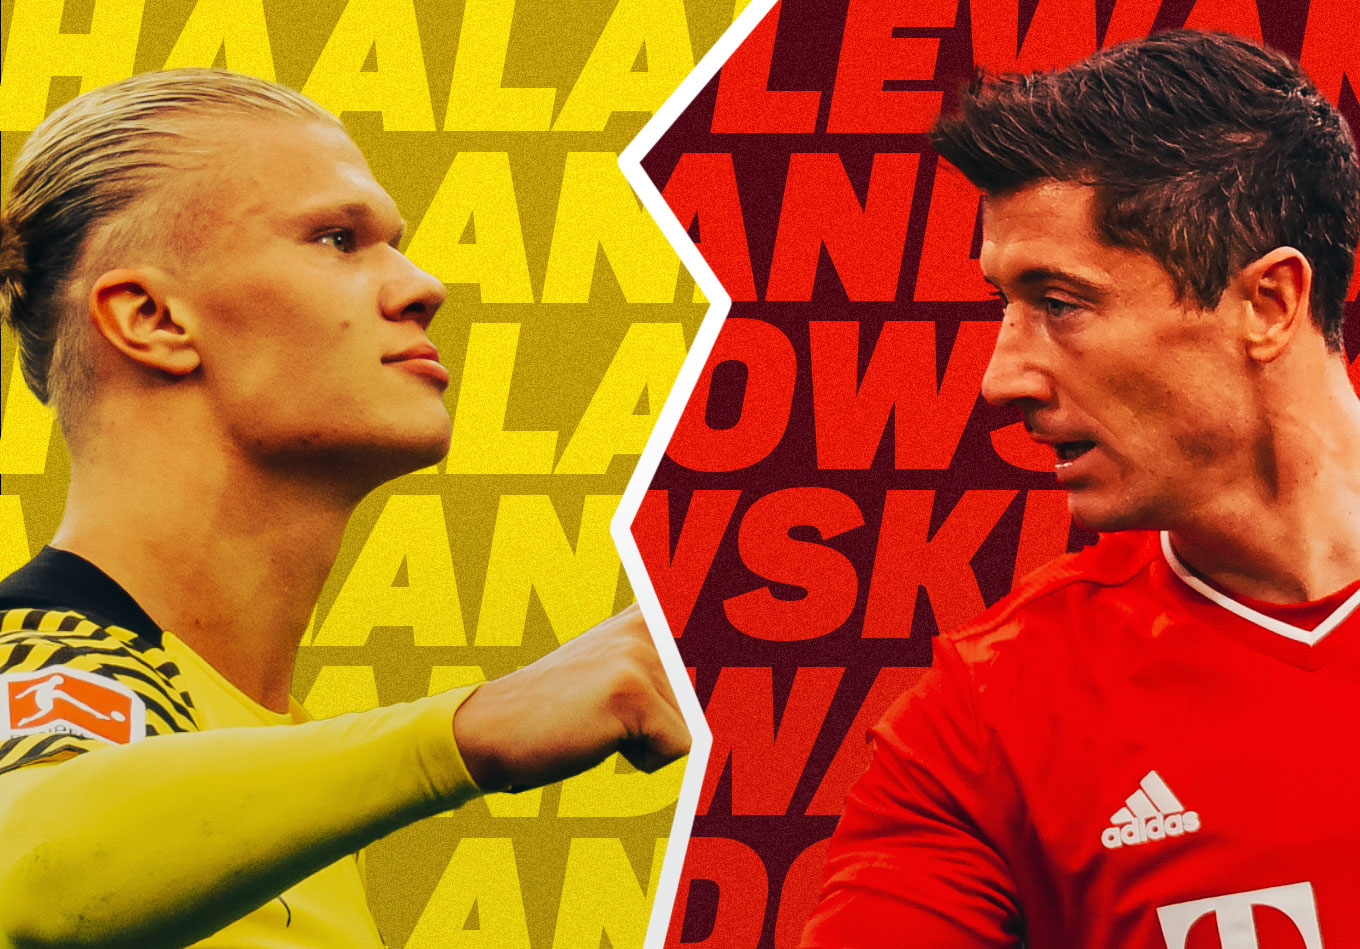 Forget the Ballon D’or, Lewandowski – Haaland and Dortmund Are Coming for You